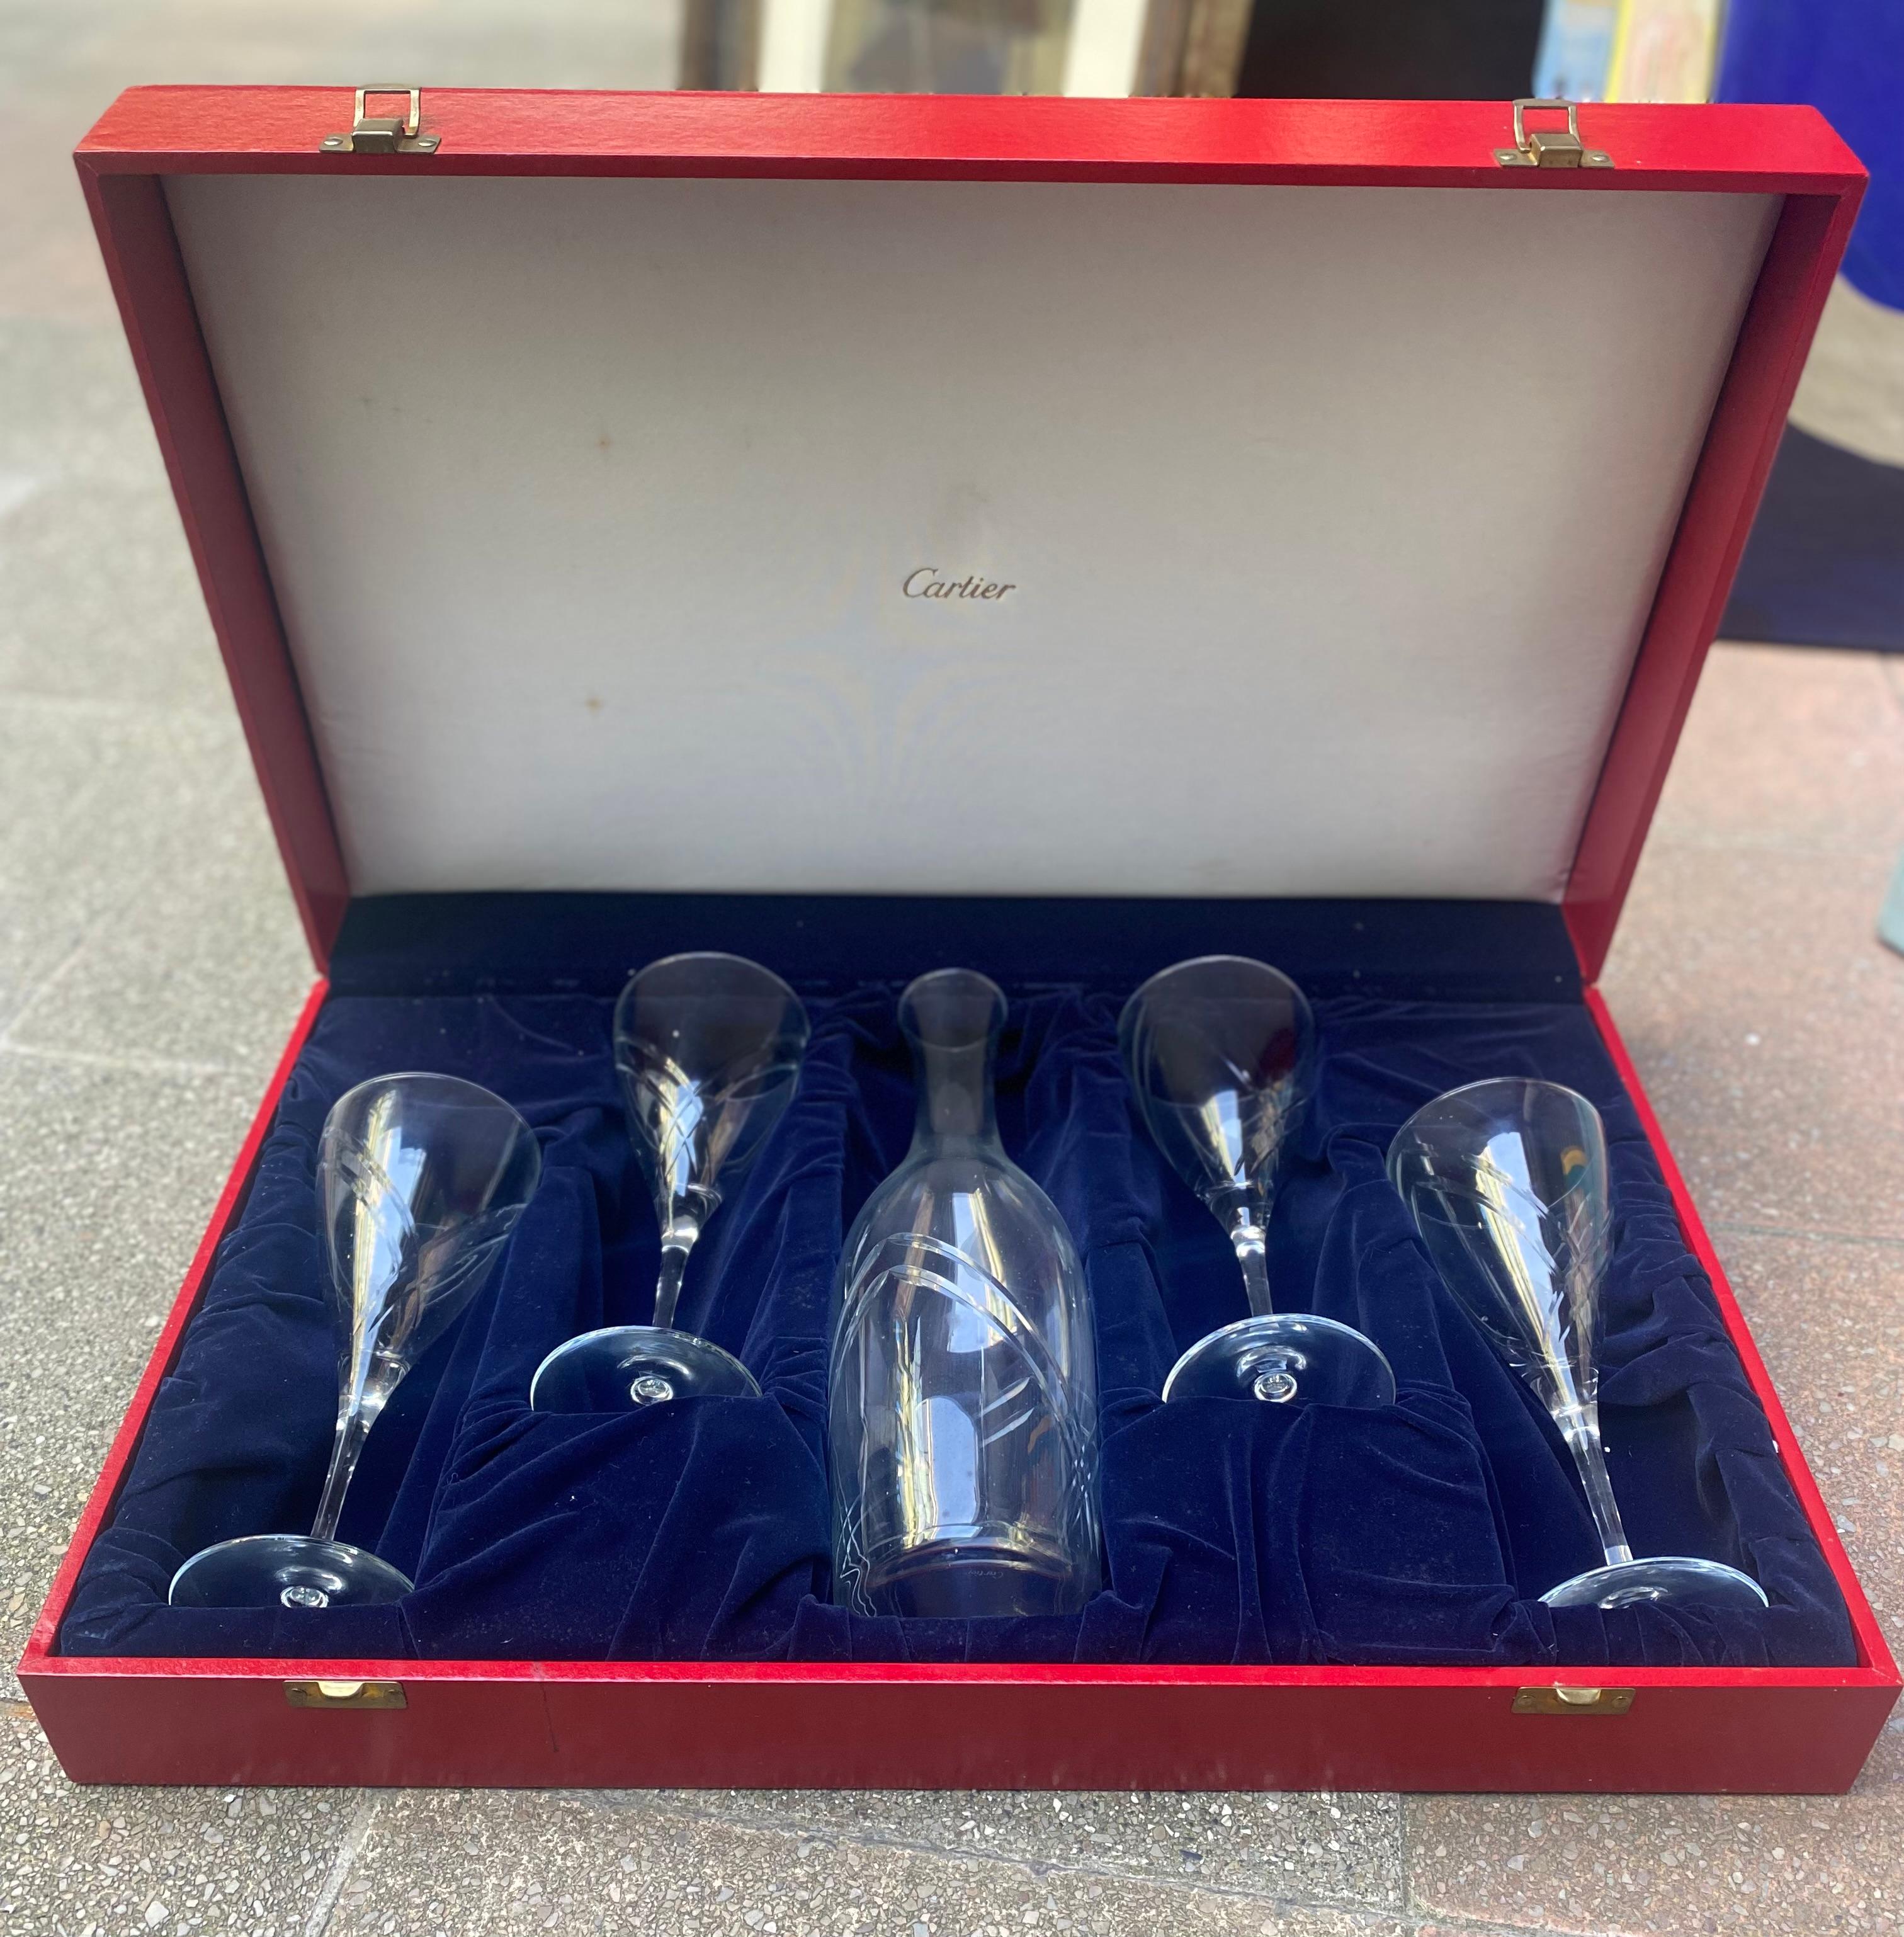 Cartier Box Consisting of 4 Water Glasses and a Crystal Water Carafe - 1960s For Sale 1